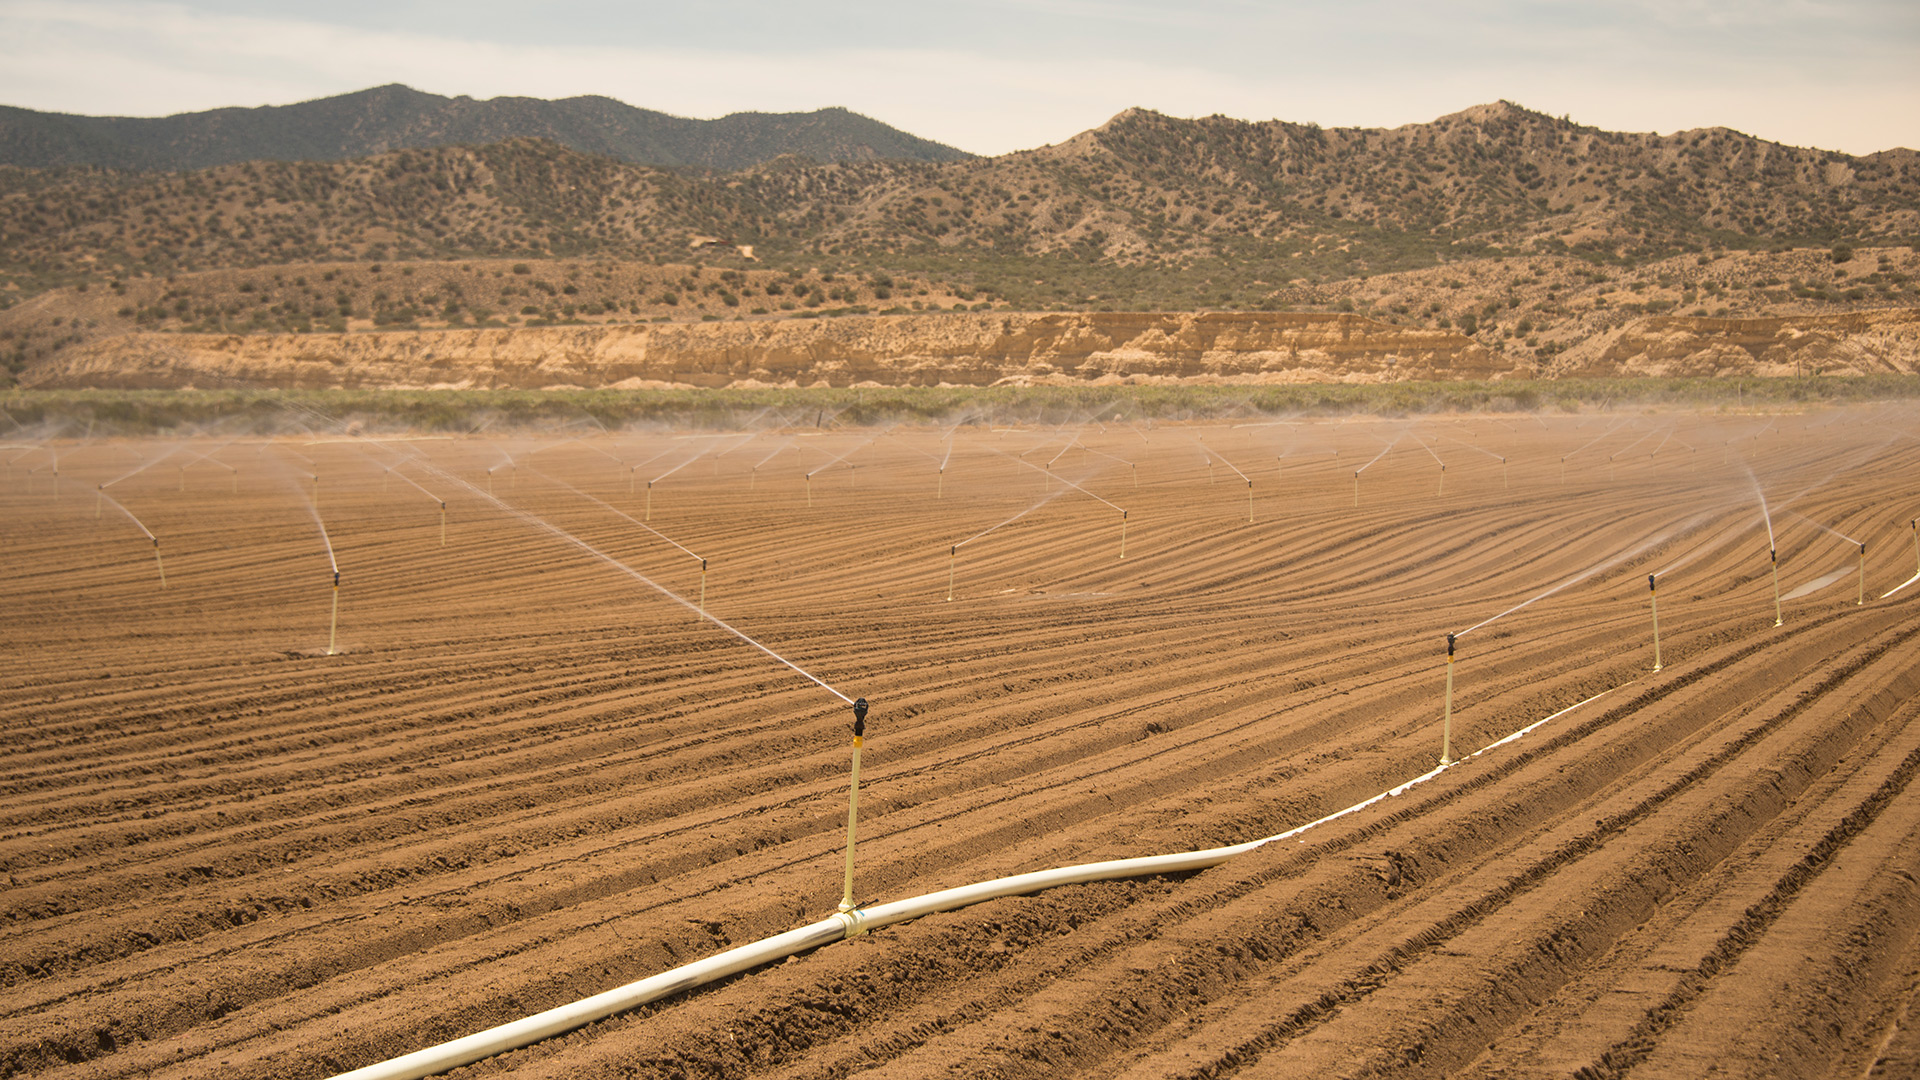 Fields being irrigated on the edge of the desert in the Cuyama Valley